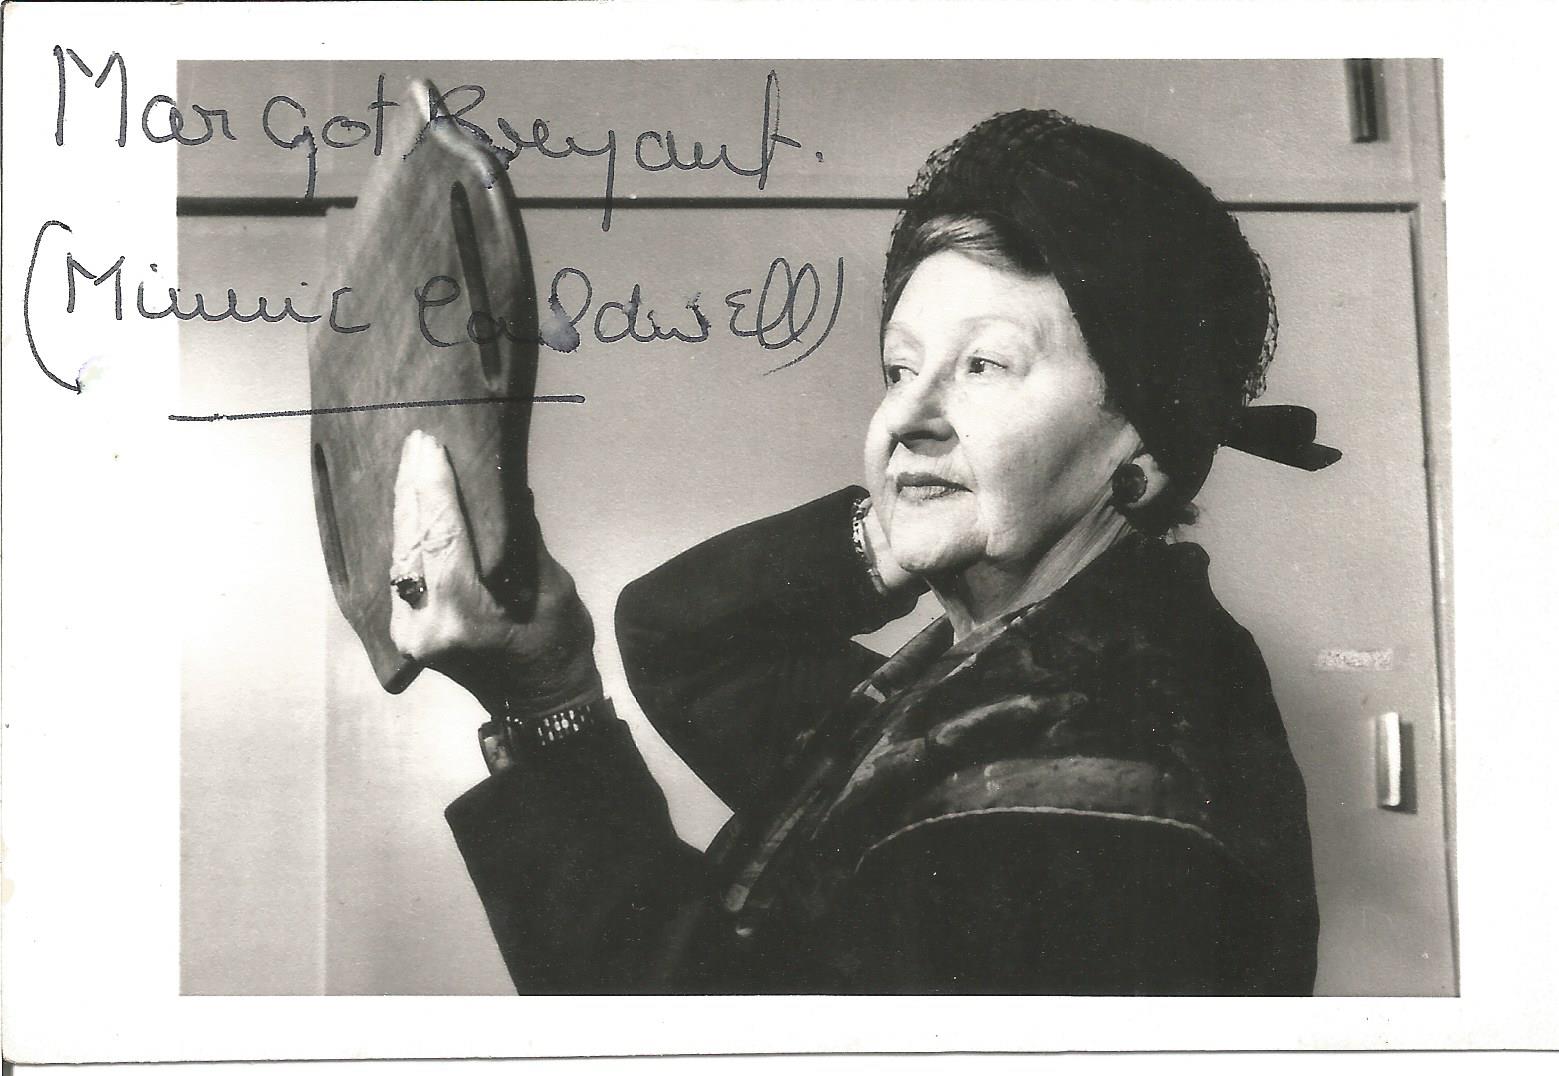 Margot Bryant signed Minnie Caldwell Coronation Street vintage 6x4 inch black and white photo.